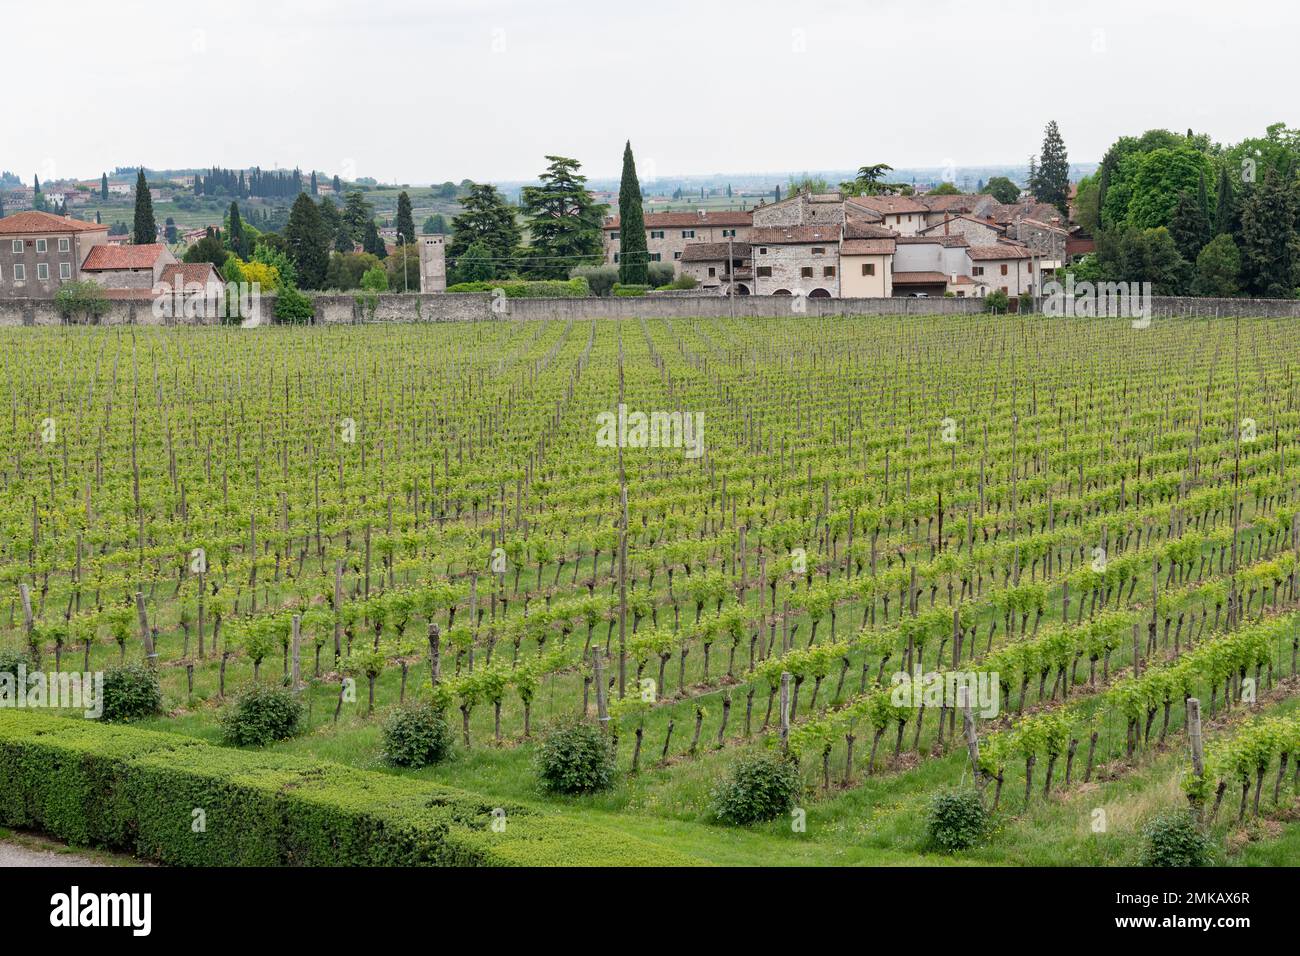 scene looking across a typical tuscan vineyard with the rows of cultivated vines stretching out Stock Photo